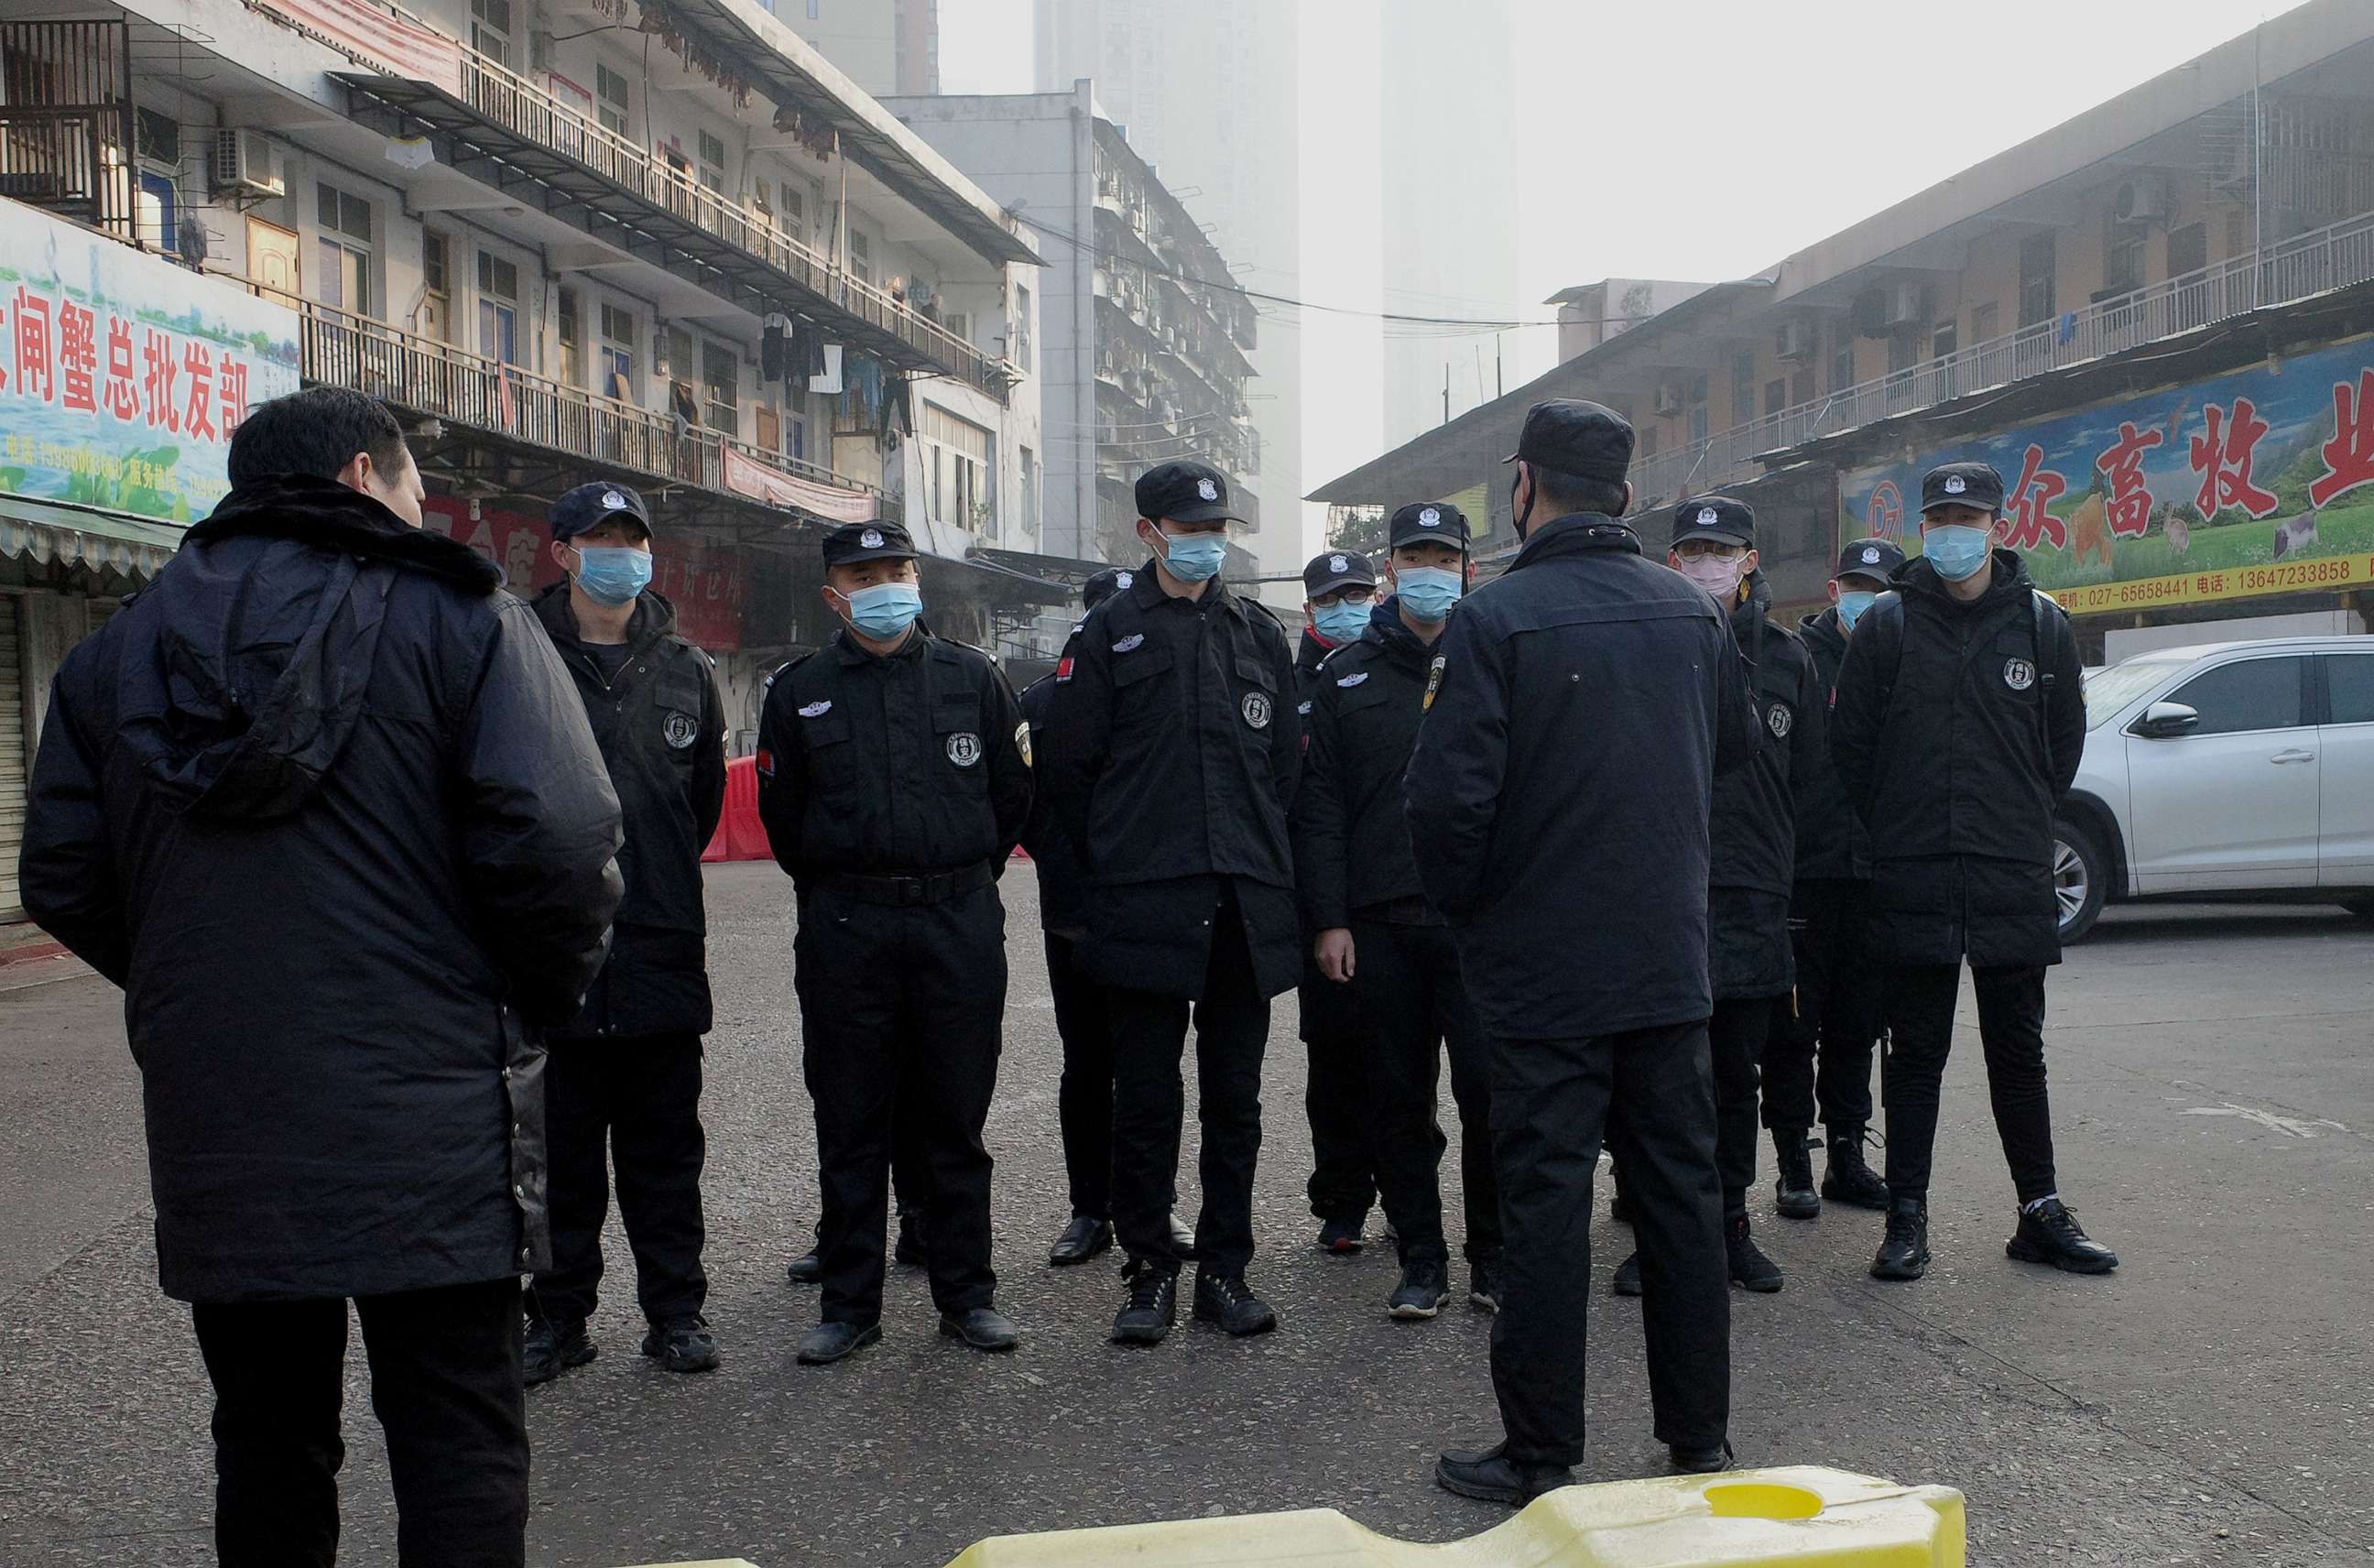 PHOTO: Security guards stand in front of the closed Huanan wholesale seafood market, where health authorities say a man who died from a respiratory illness had purchased goods from, in the city of Wuhan, Hubei province, Jan. 12, 2020.